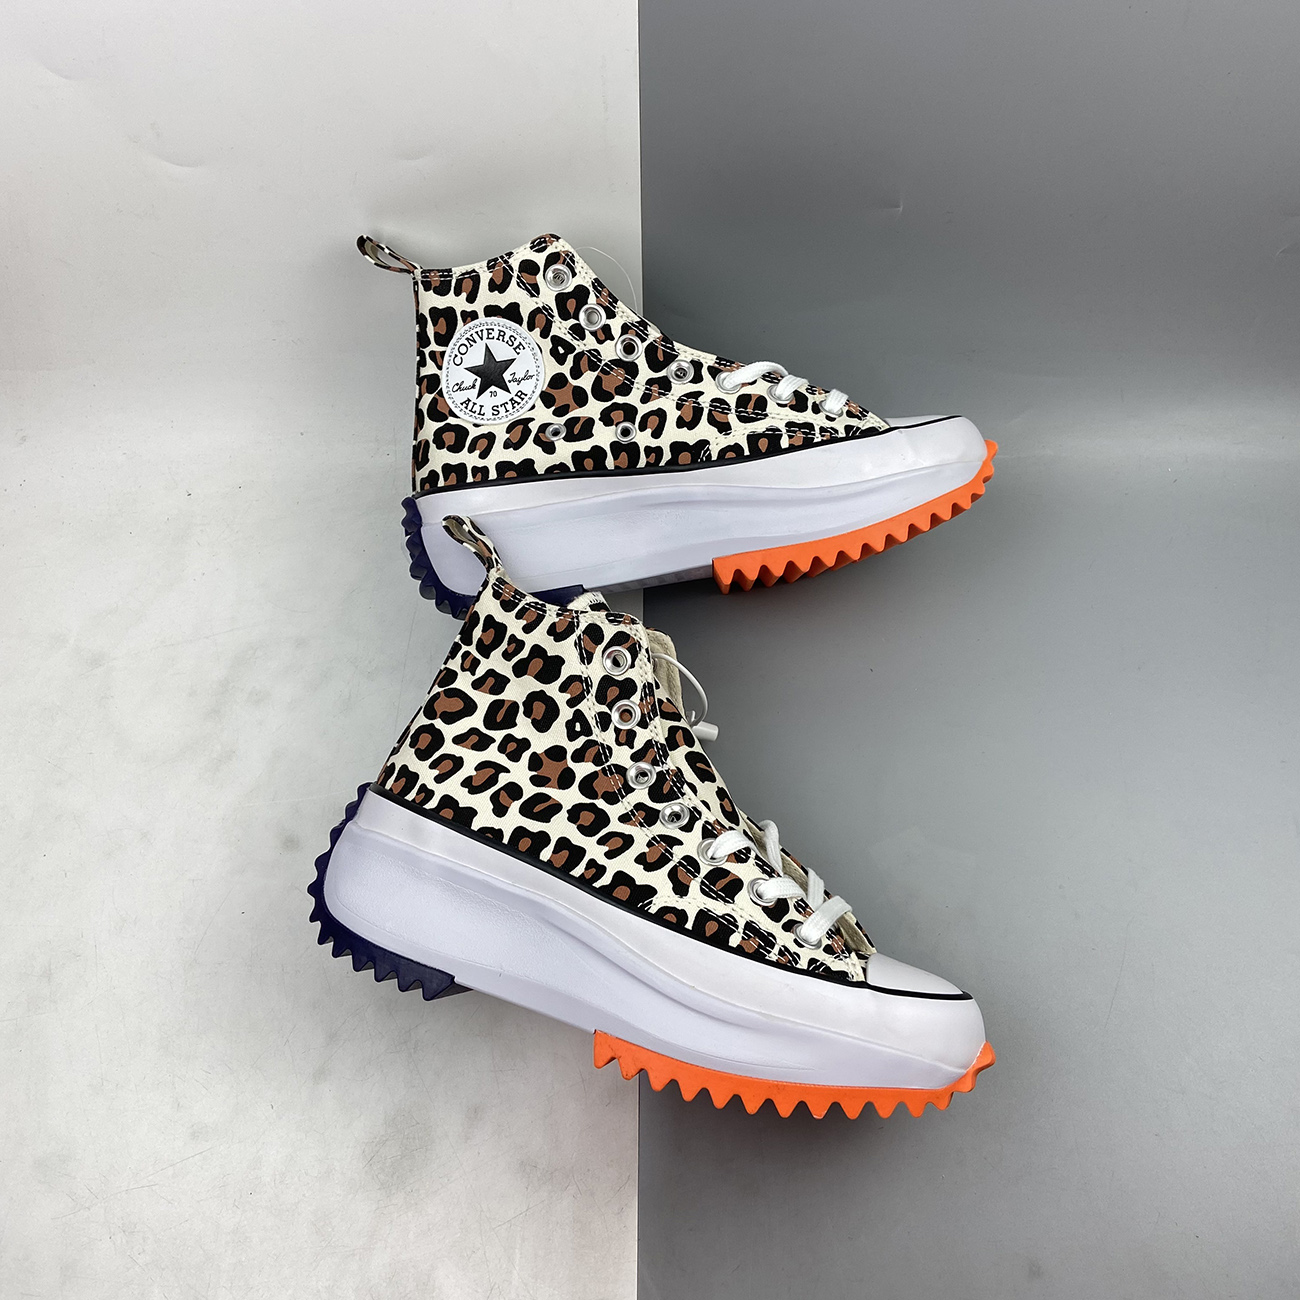 JW Anderson x Converse Run Star Hike Leopard For Sale – The Sole Line